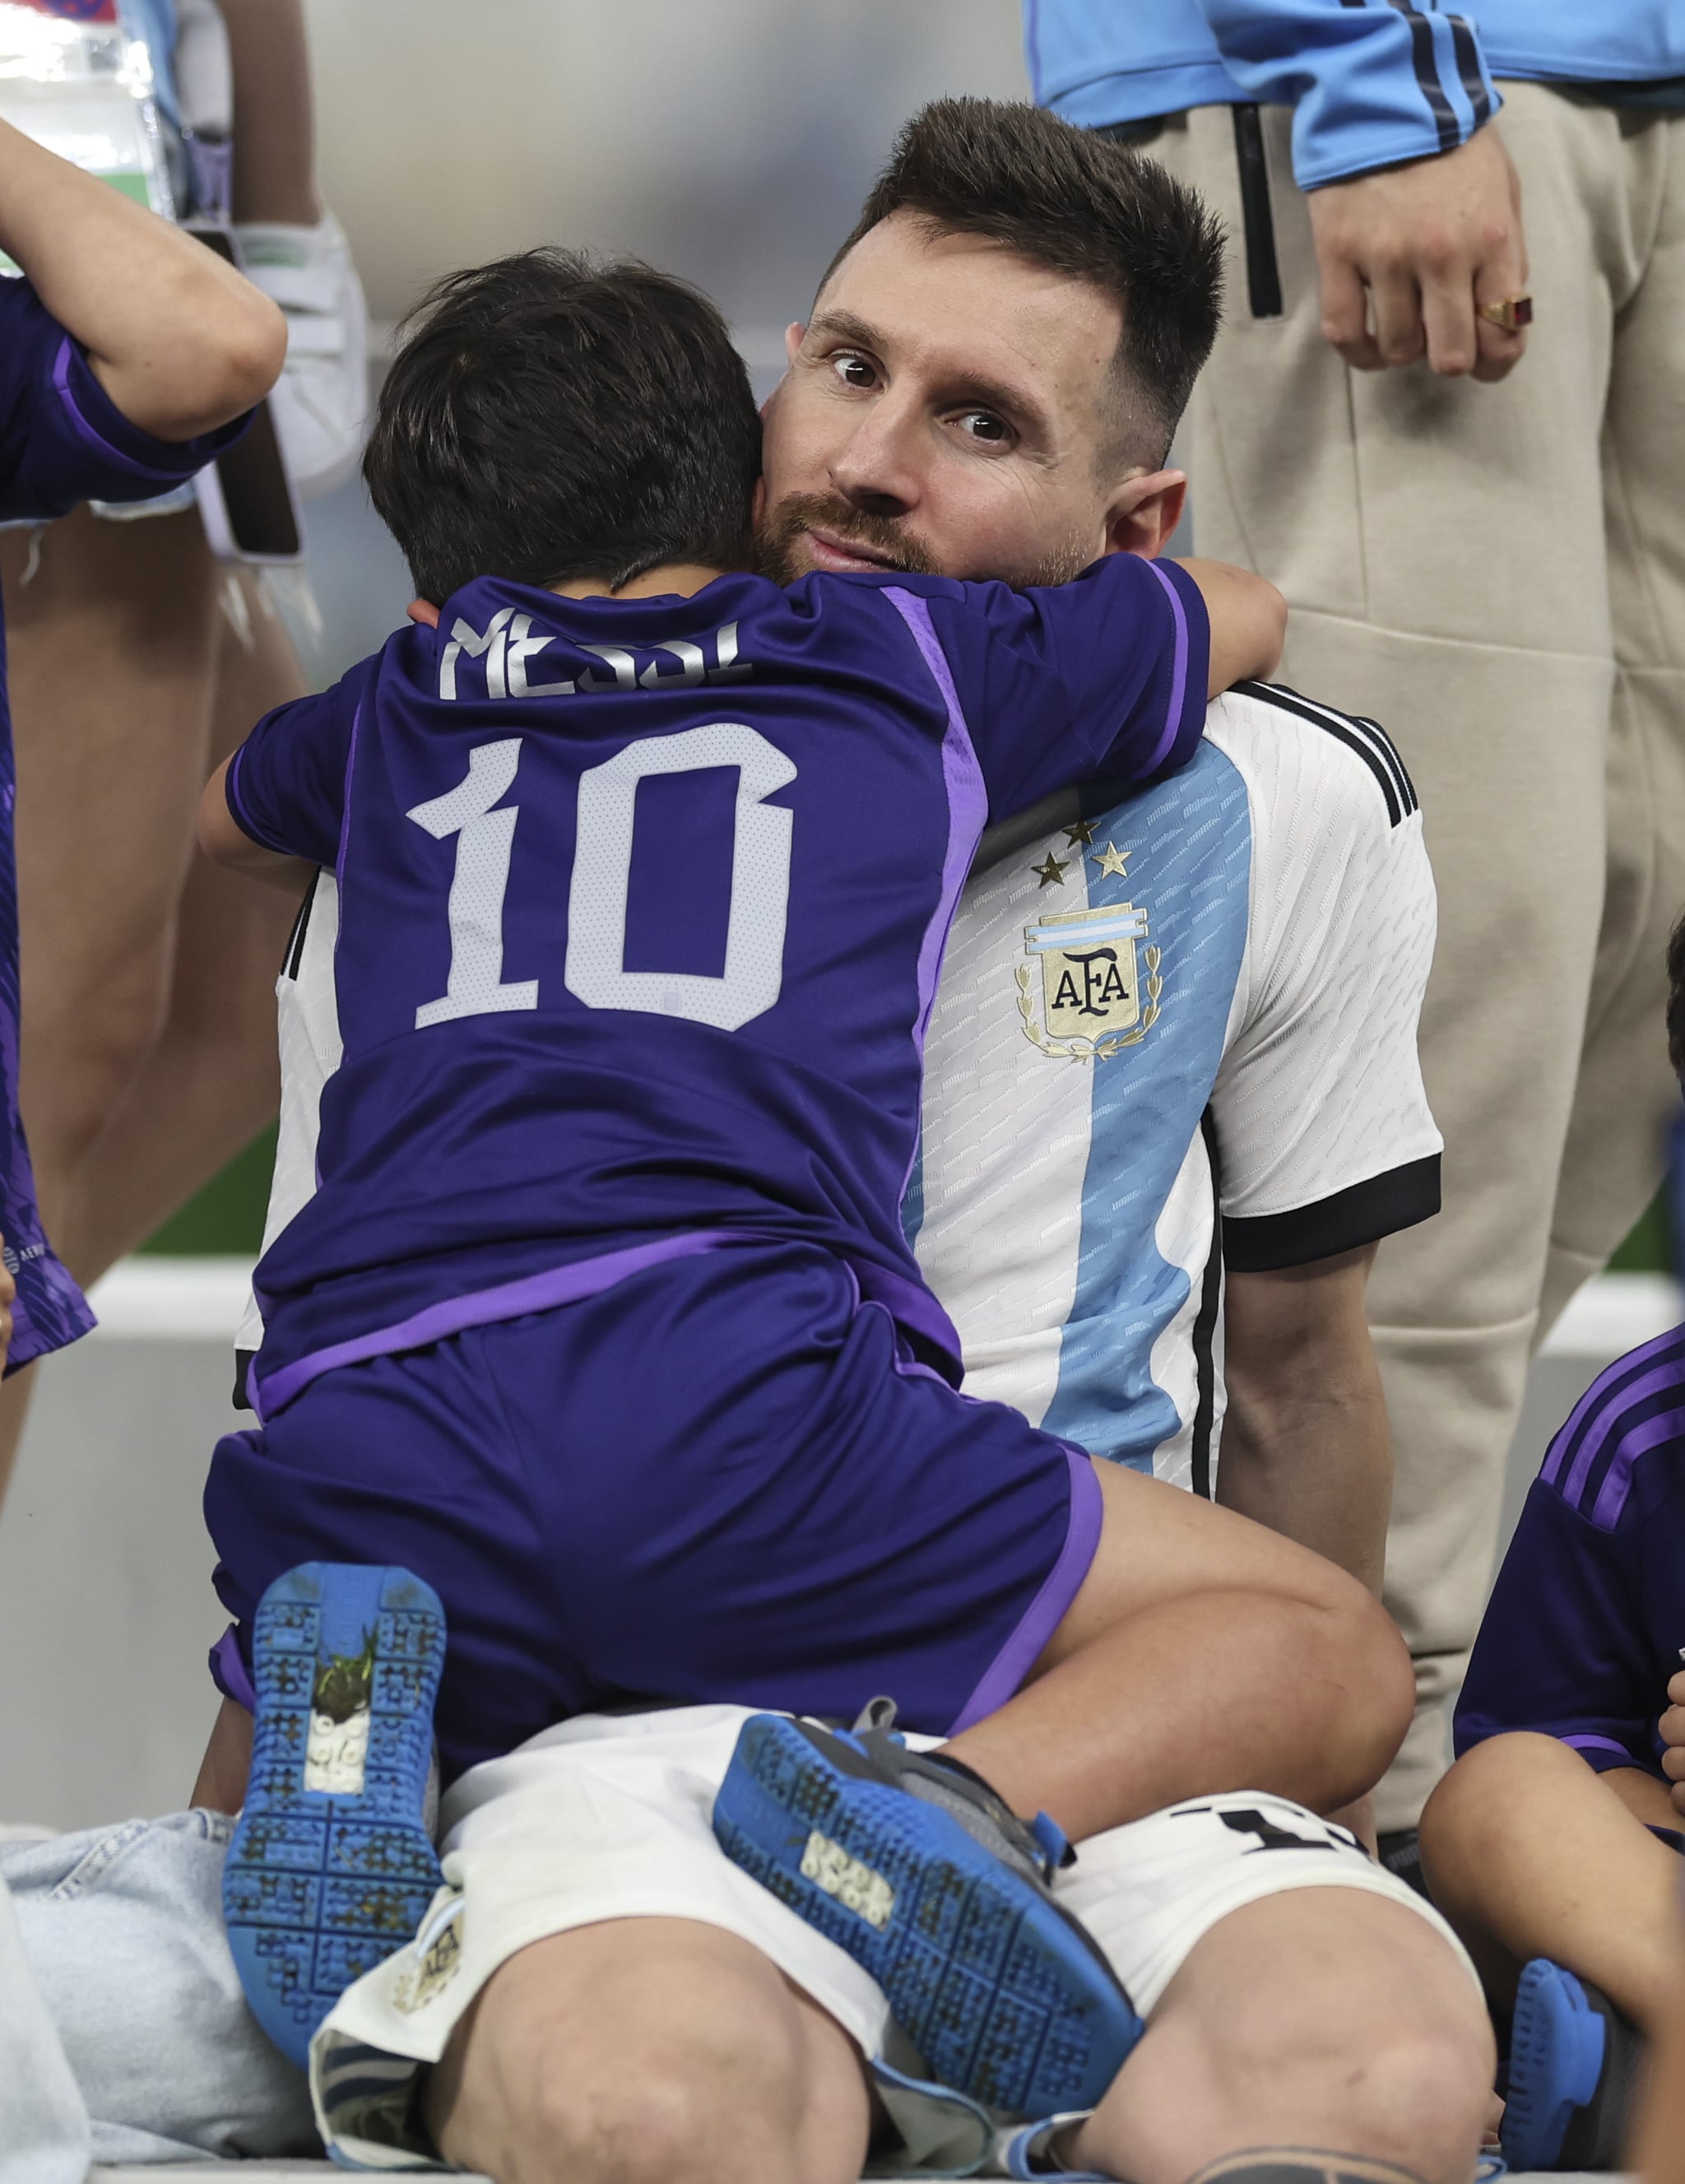 Celebrity Gossip & News | Lionel Messi's Family Celebrate His World Cup Win  After the Game: "MY CHAMPION" | POPSUGAR Celebrity UK Photo 11